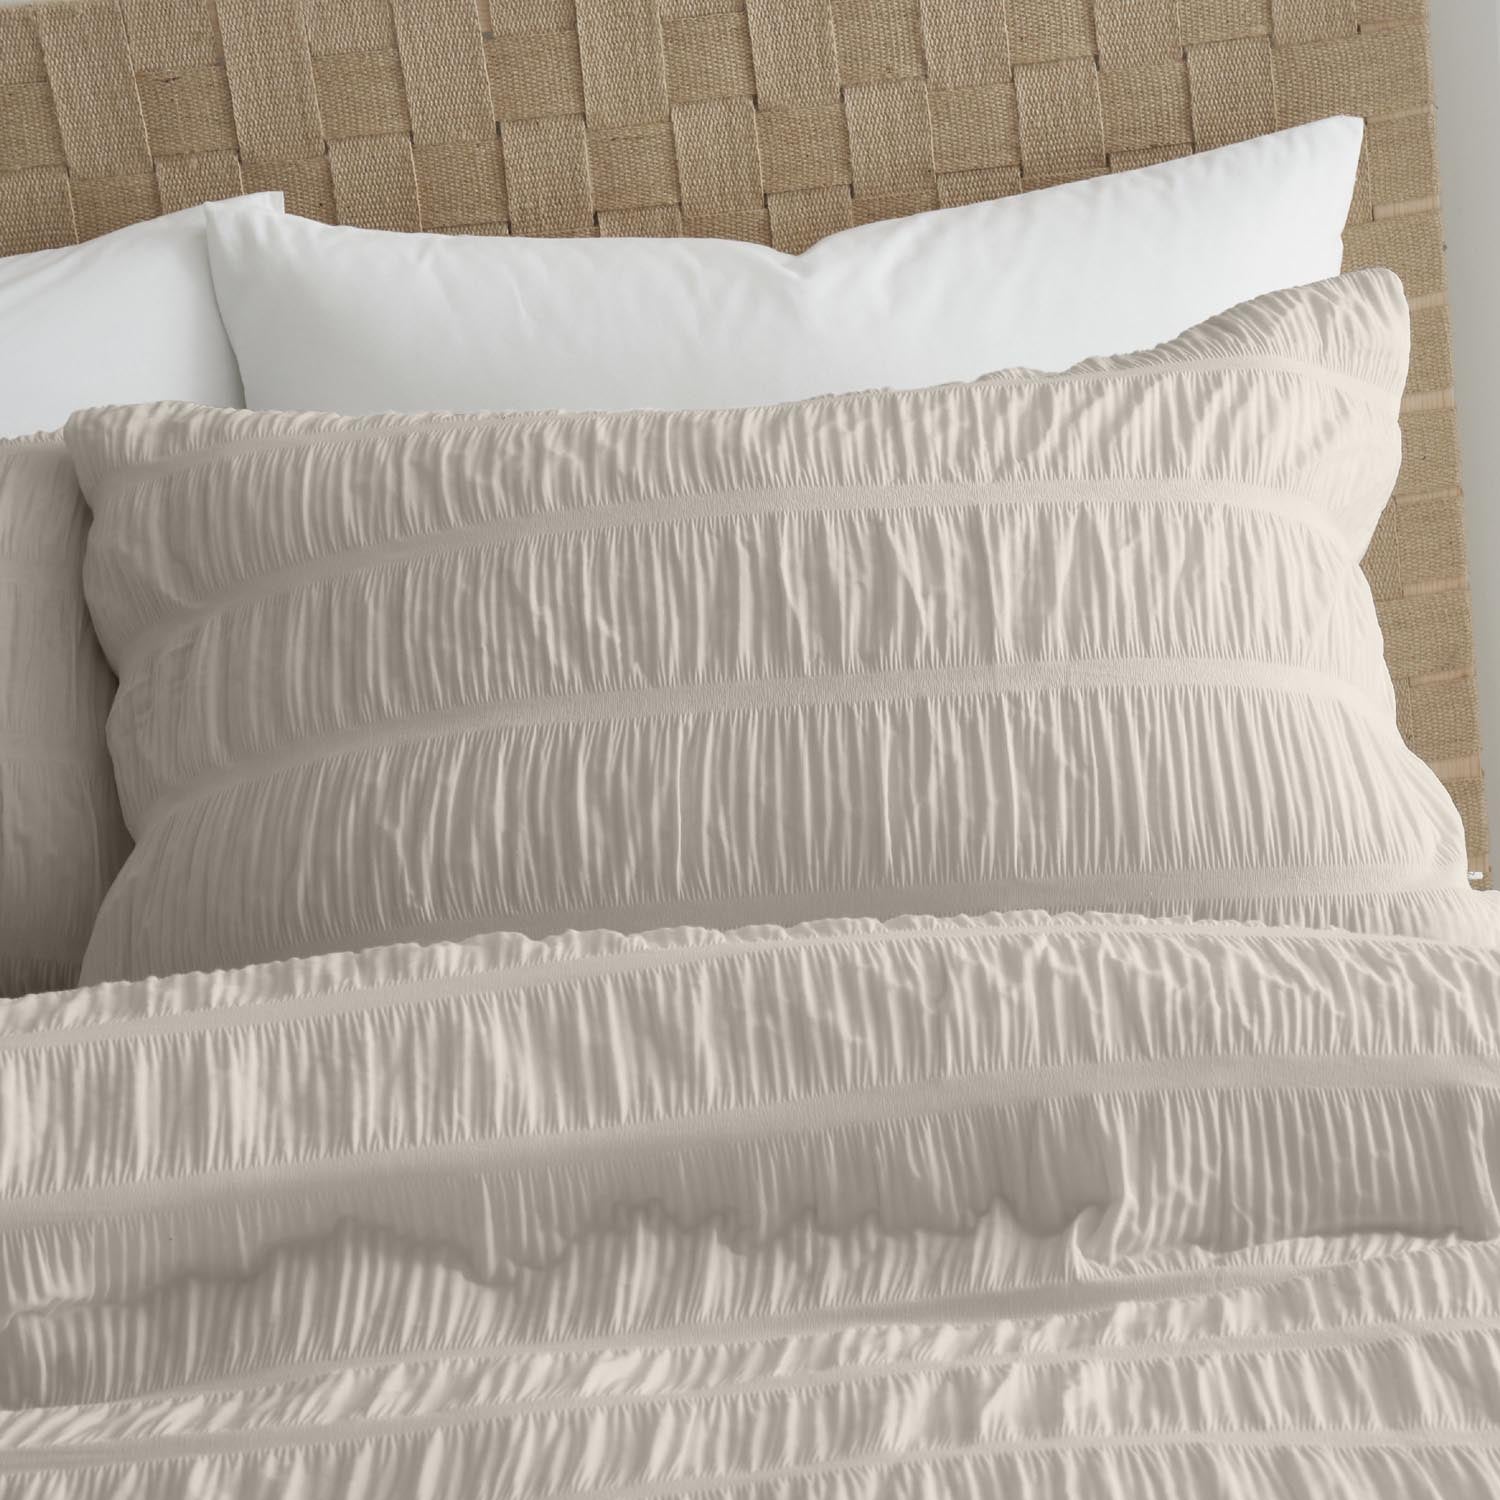 The Home Luxury Collection Textured Seersucker Duvet Cover 2 Shaws Department Stores